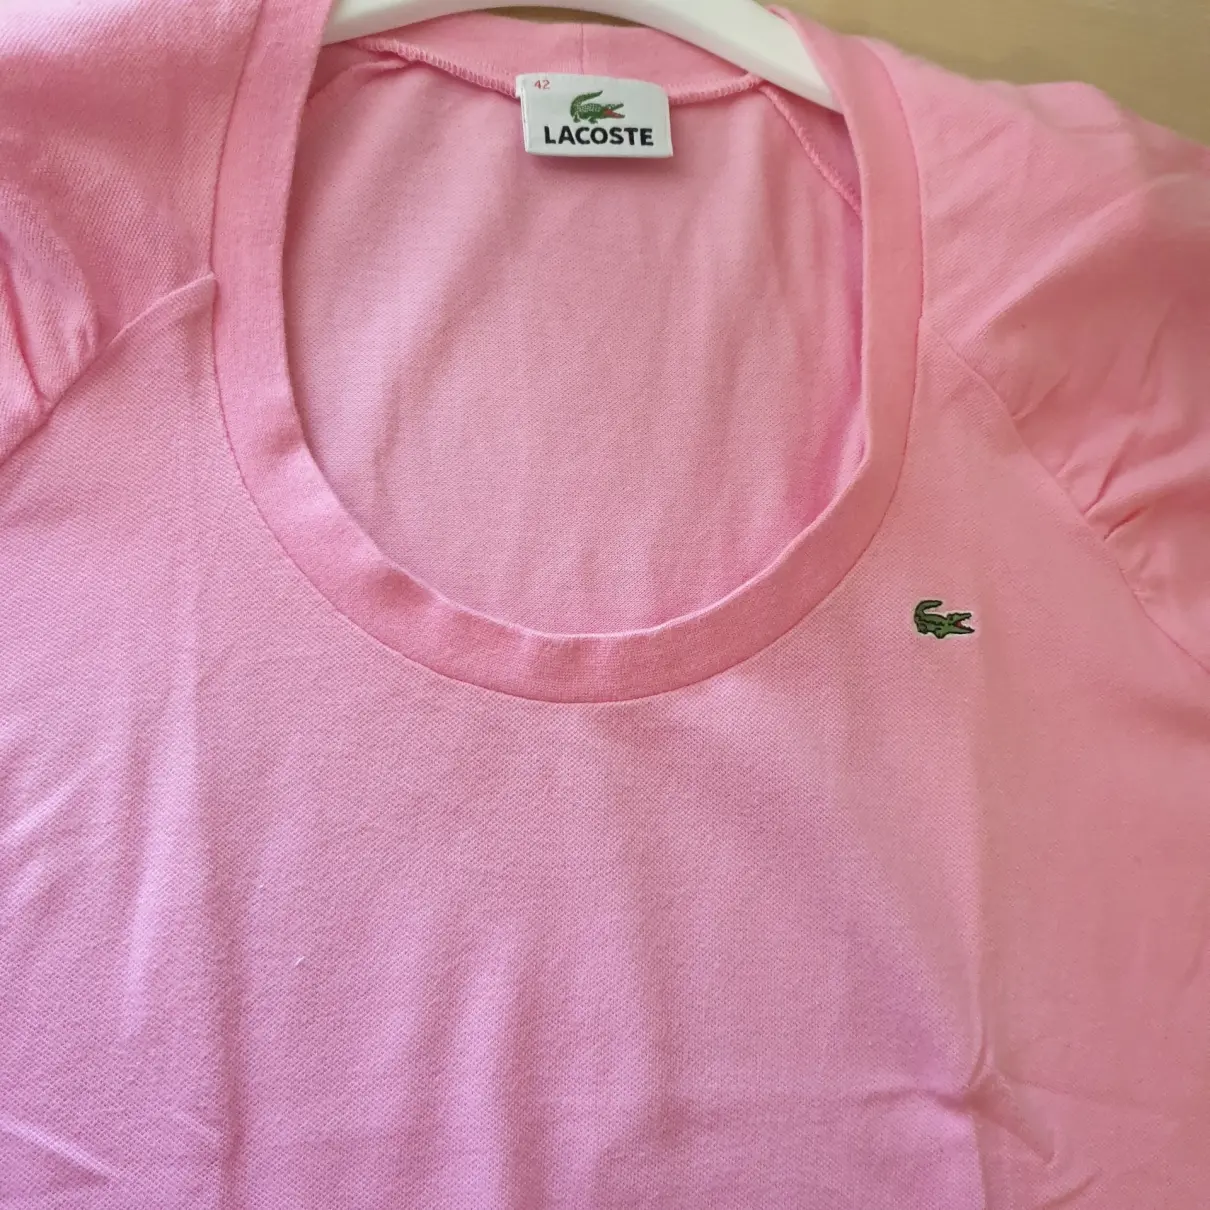 Buy Lacoste Pink Cotton Top online